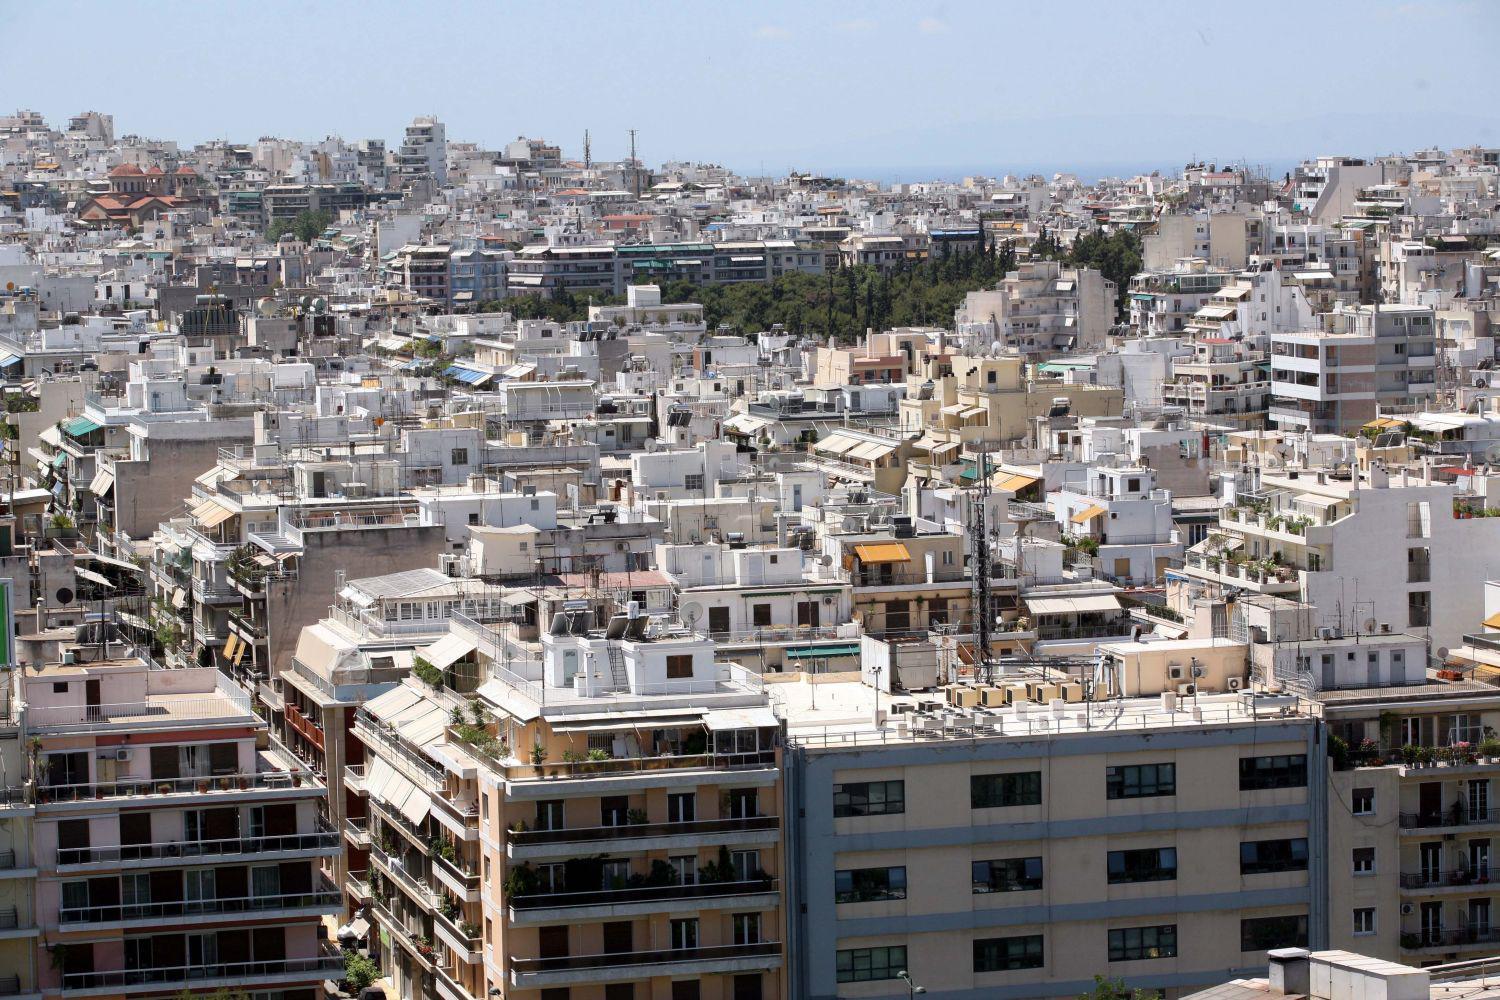 Greek real estate ownership value soars to €761,38B according to AADE